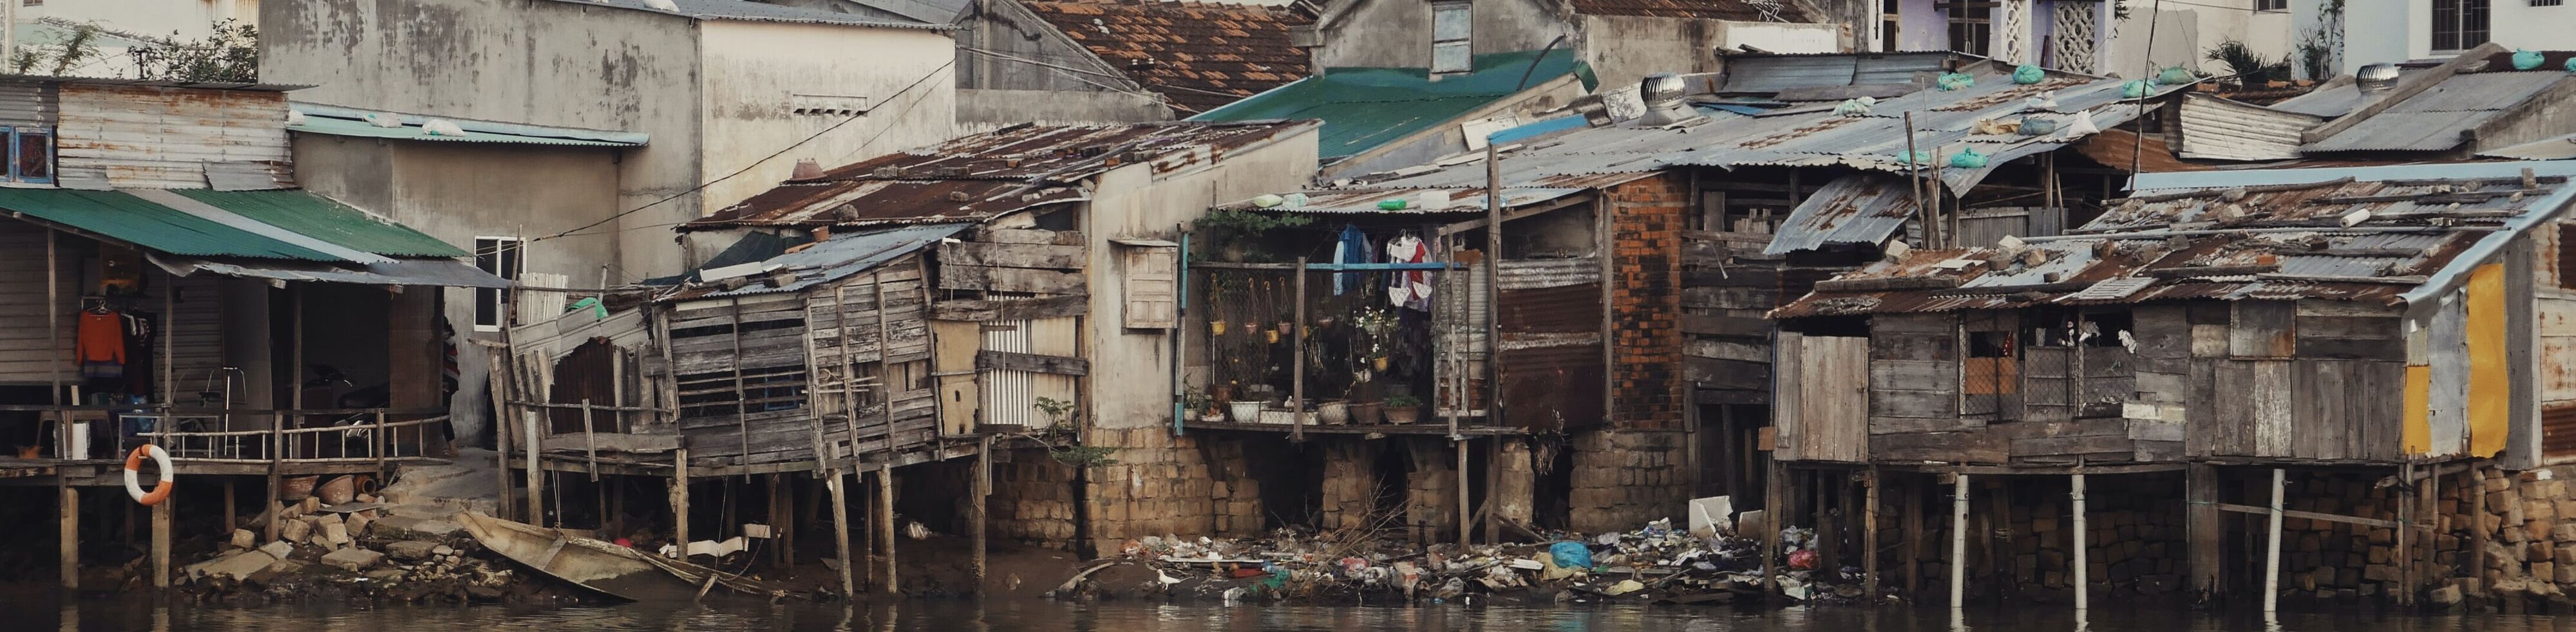 Urban Poverty in Malanday's background image'